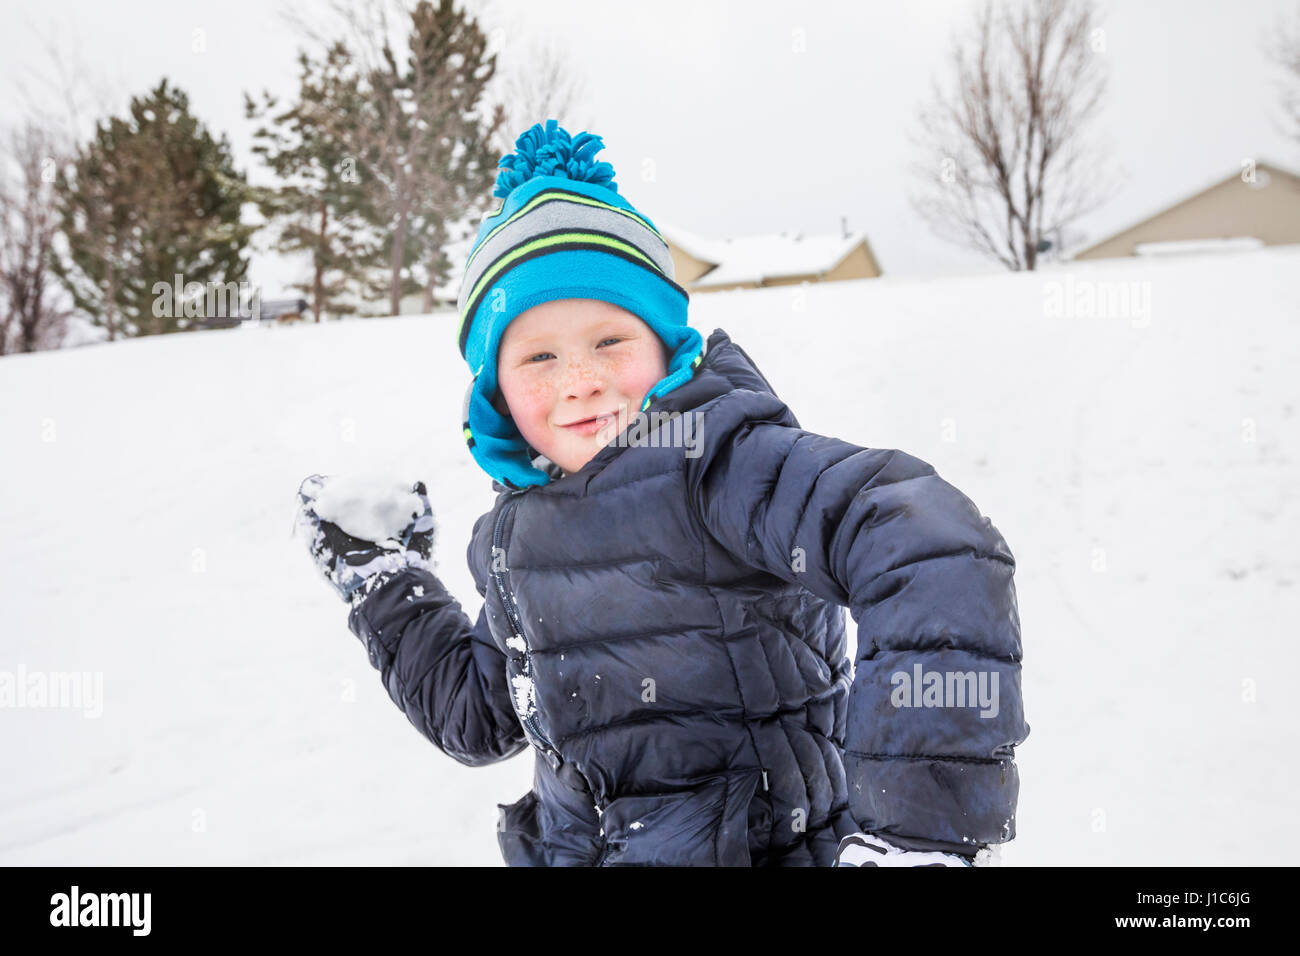 Smiling boy throwing snowball in winter Stock Photo